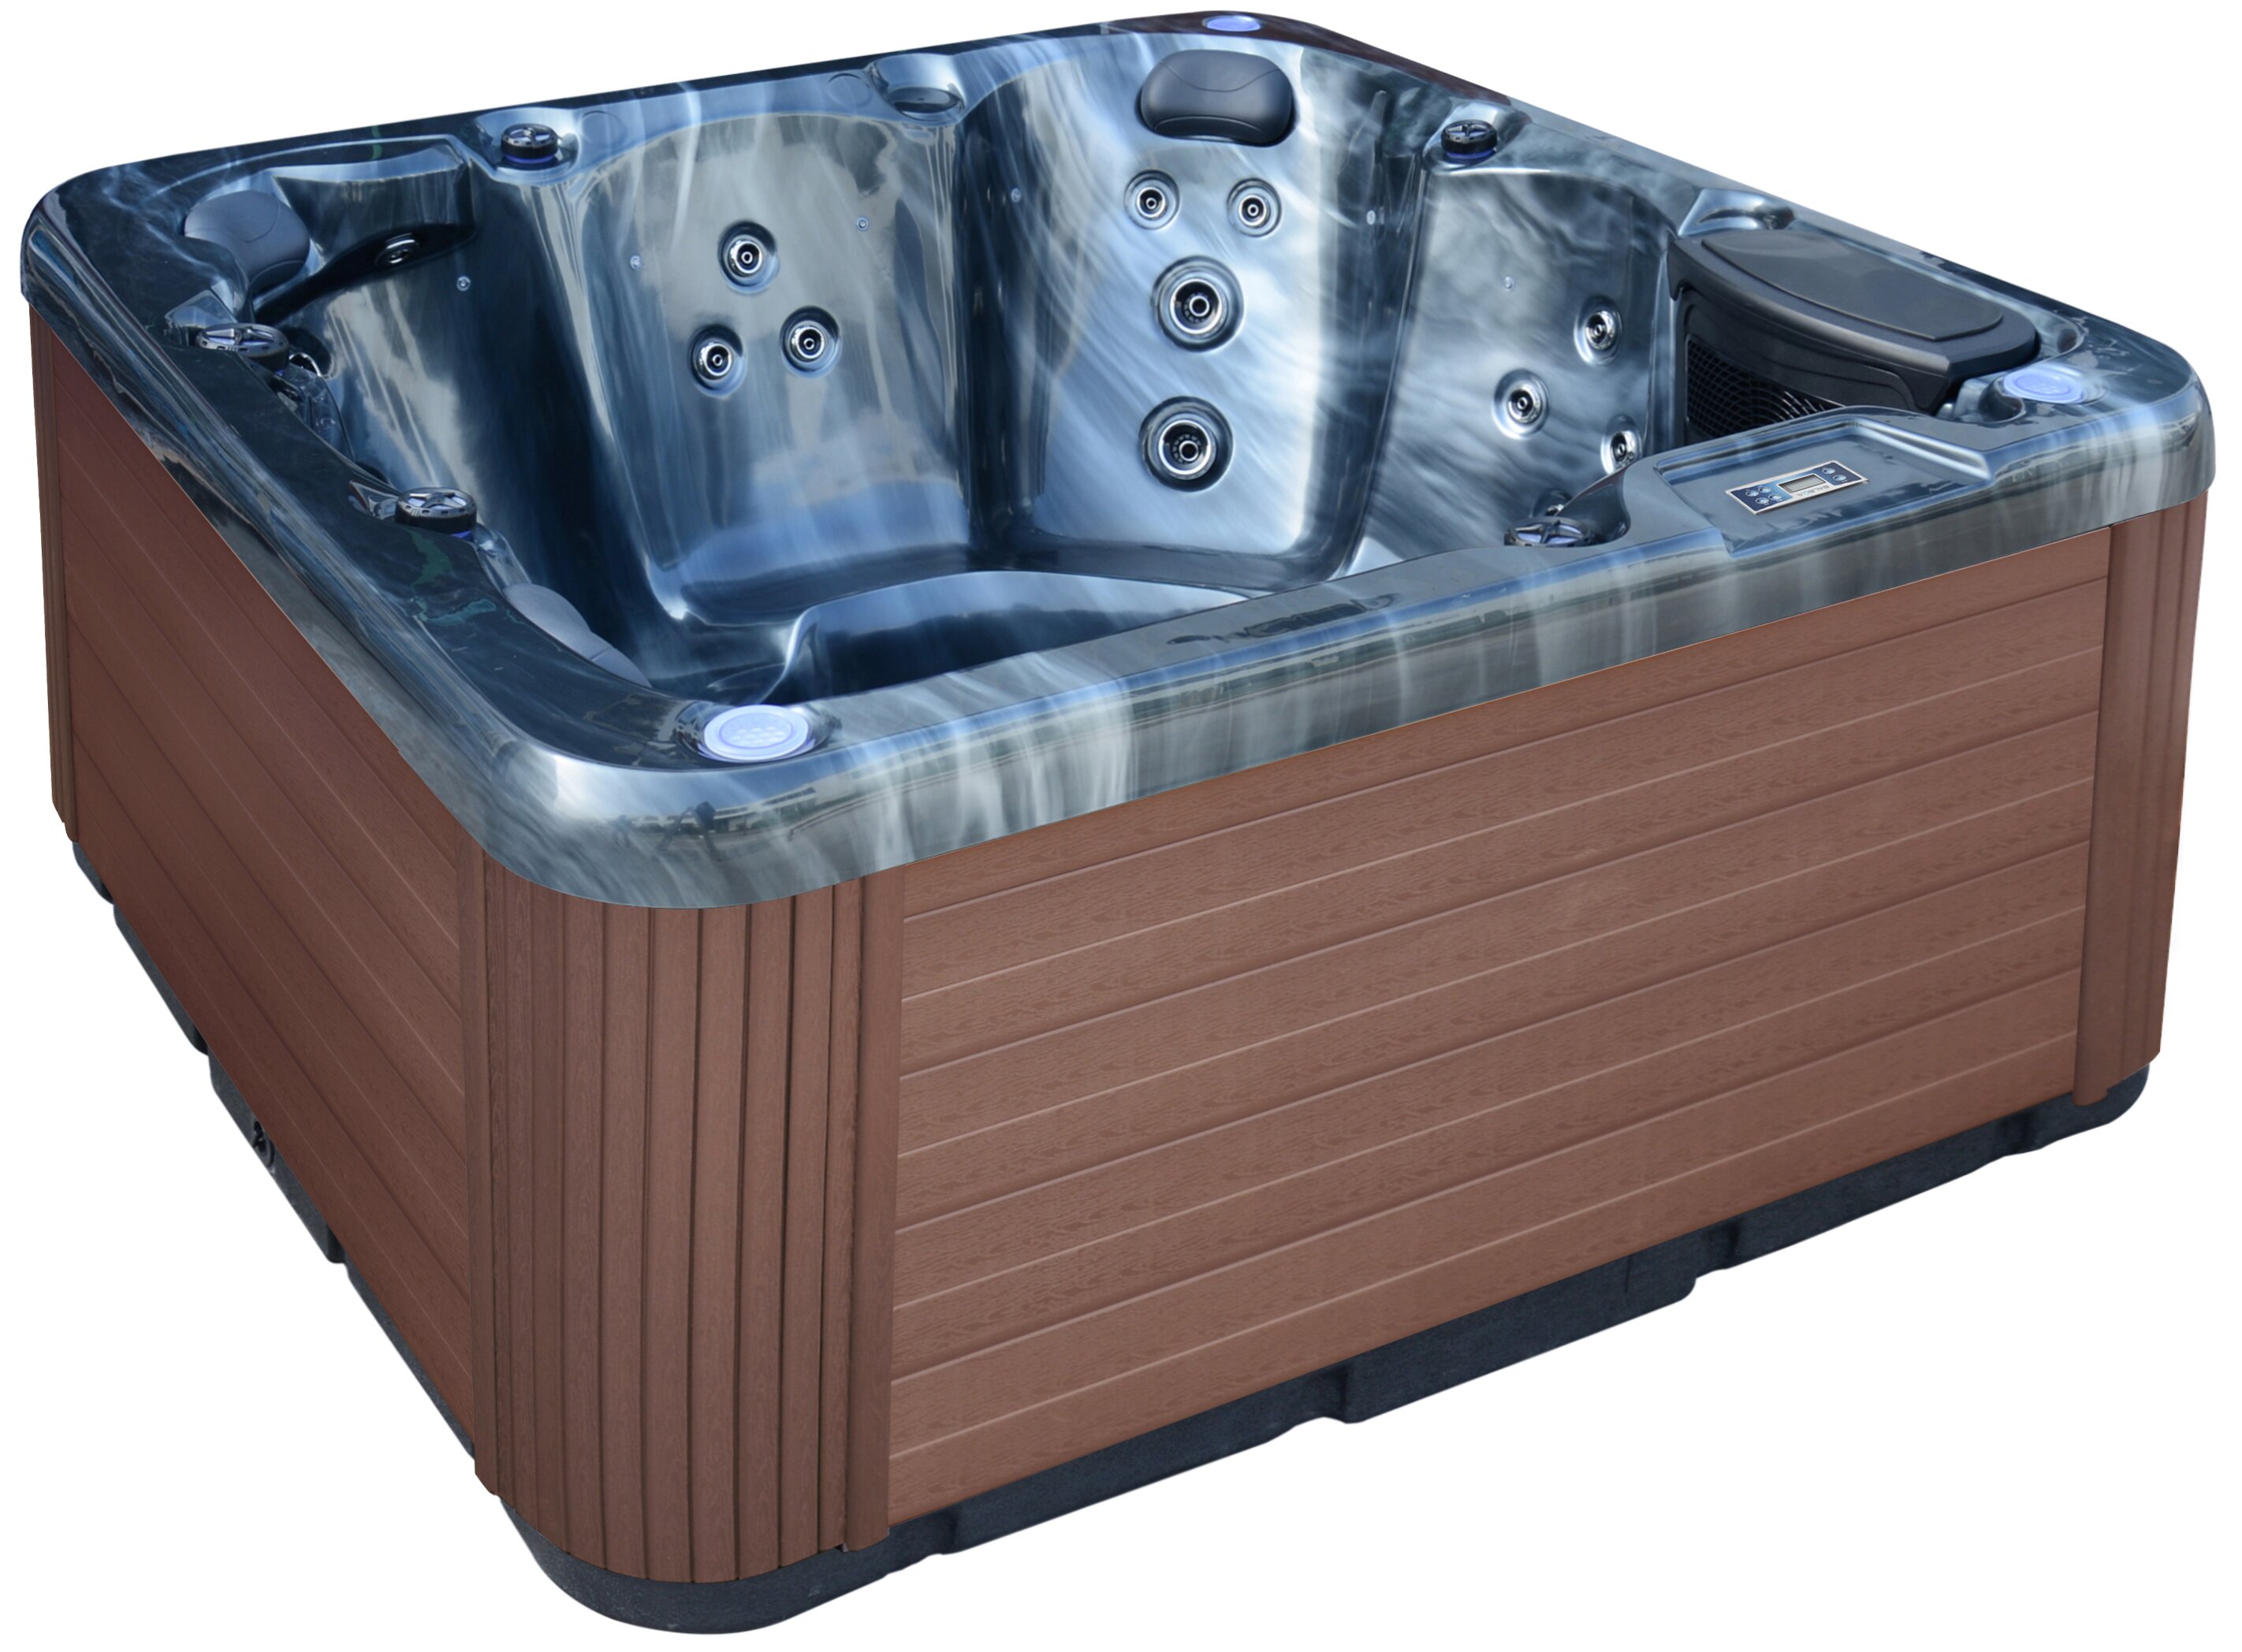 Home and Garden Spas 6-Person 40-Jet Hot Tub with MP3 Auxiliary Output 